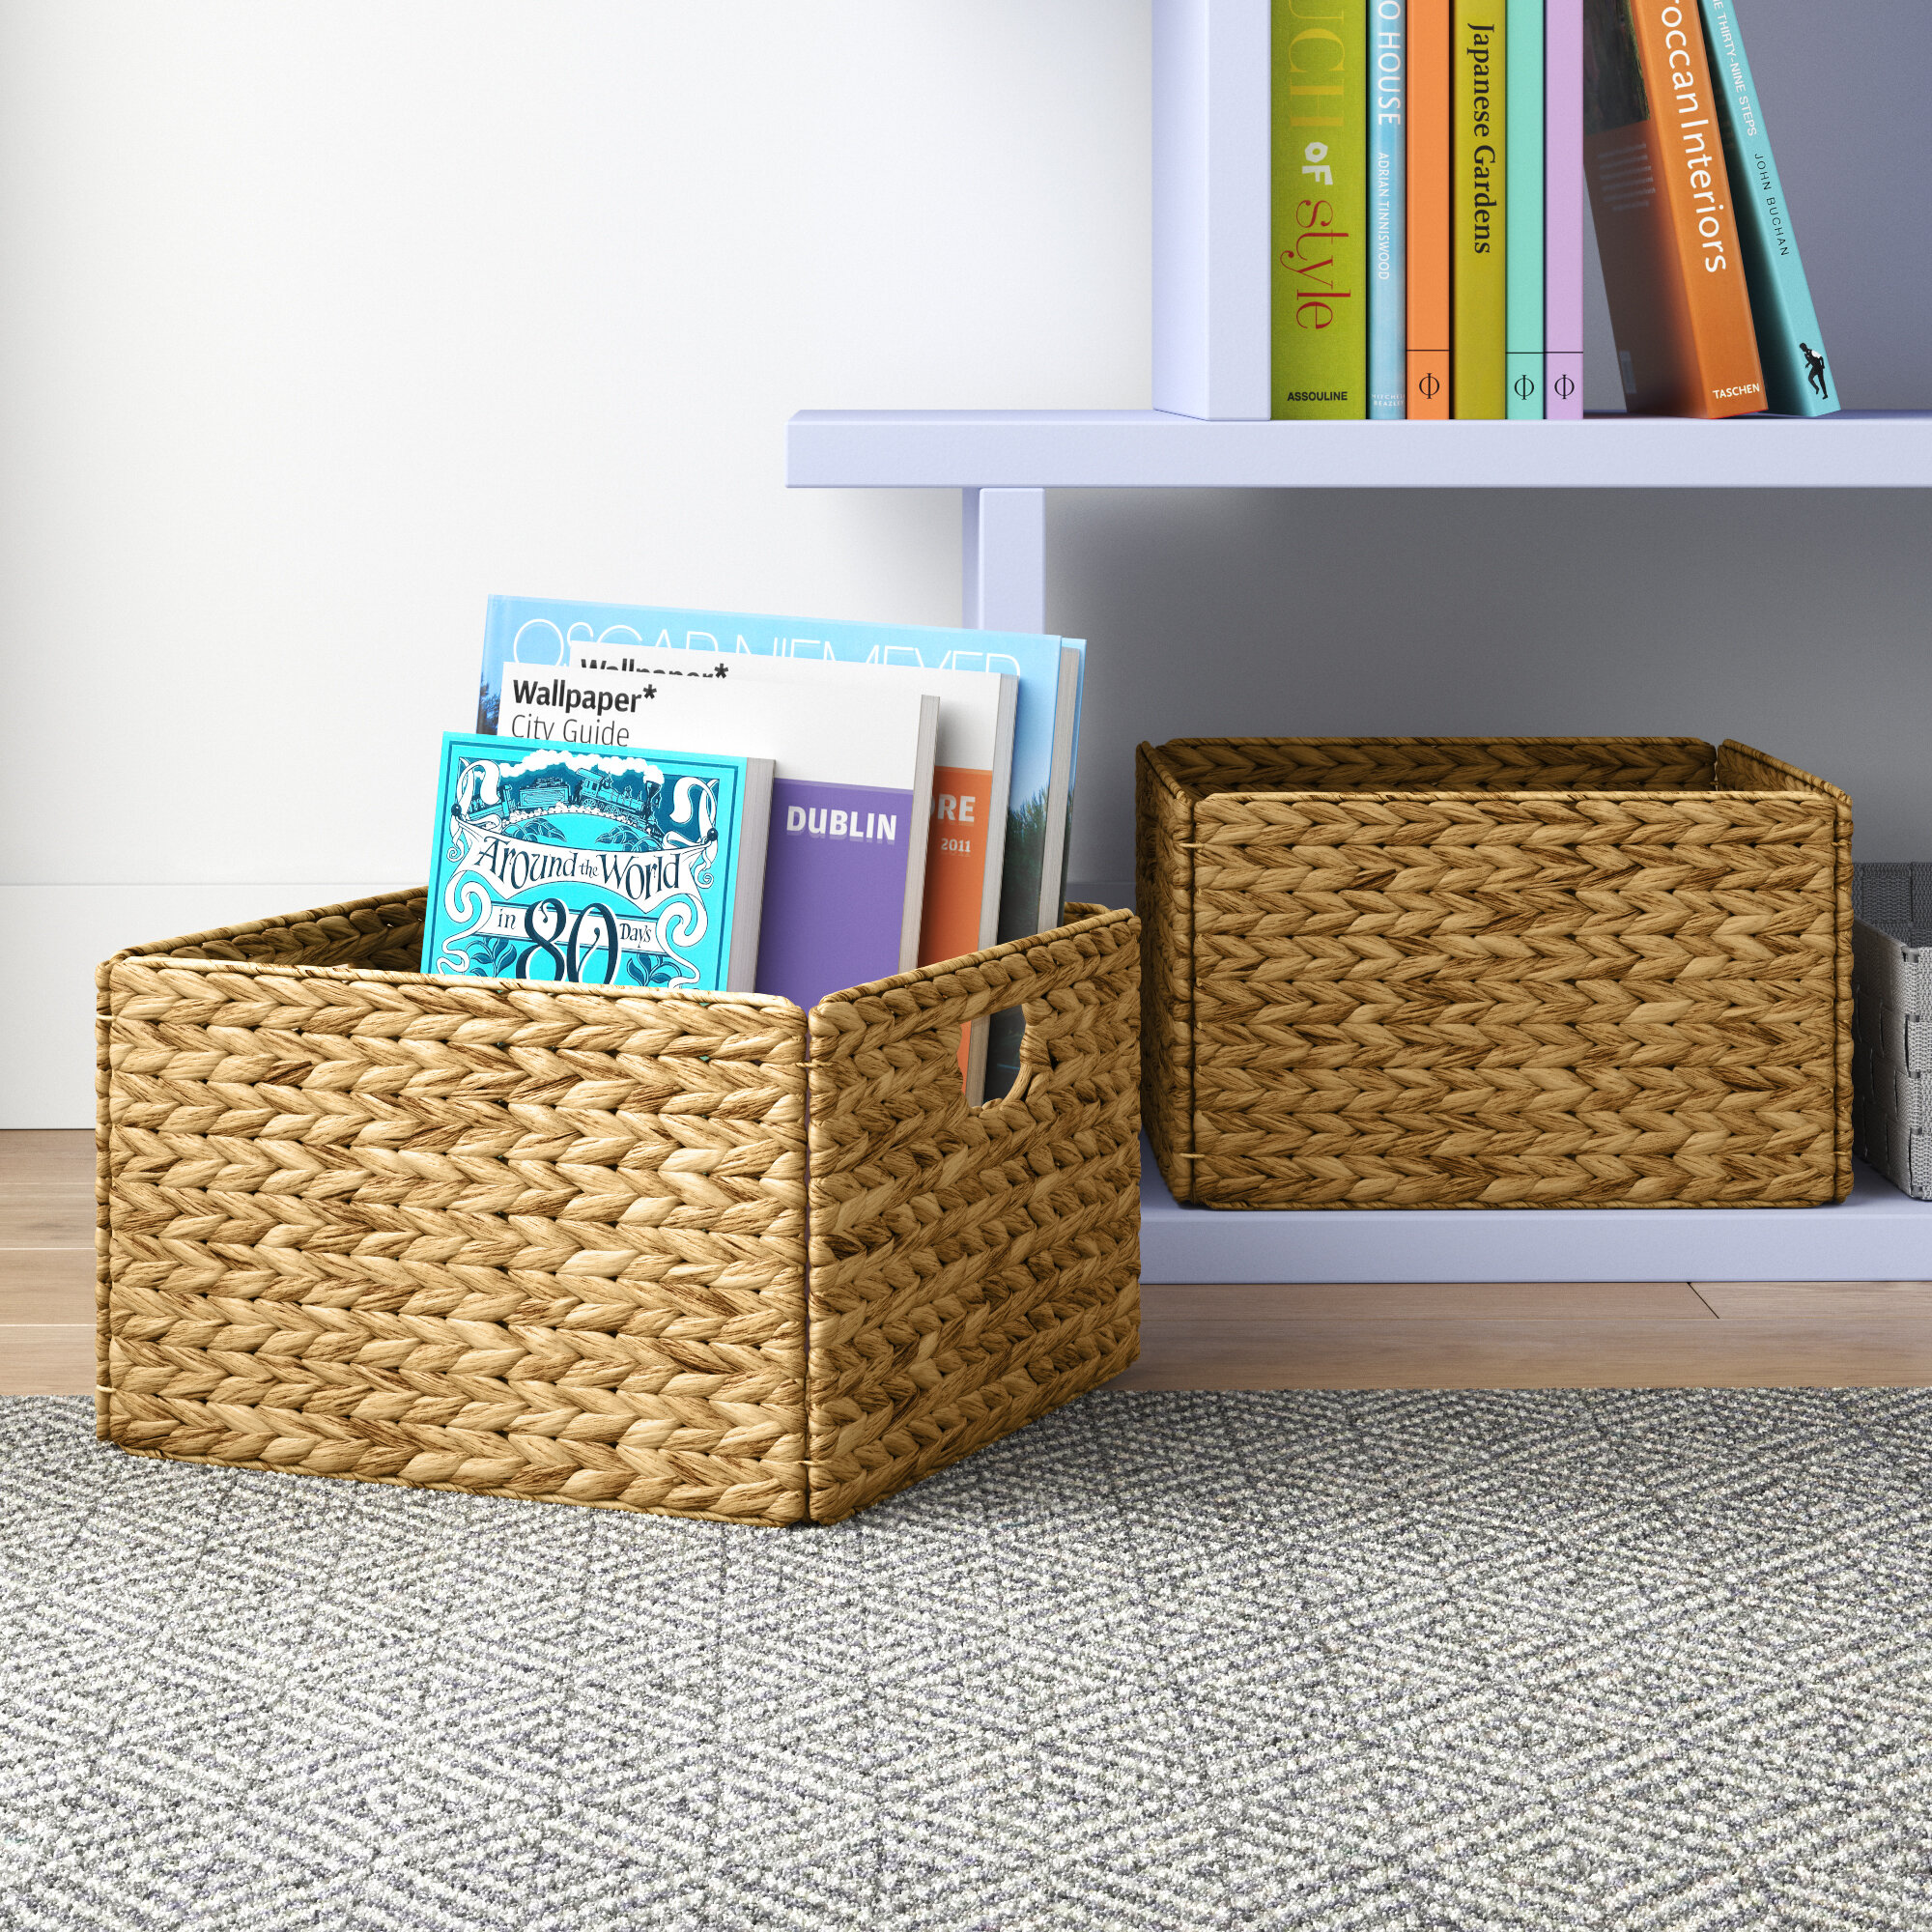 Creative Design with Cotton Rope Wool Storage Basket Beautiful and Durable for Makeup Book Baby Toy Storage IMCROWN Foldable Storage Bin Basket